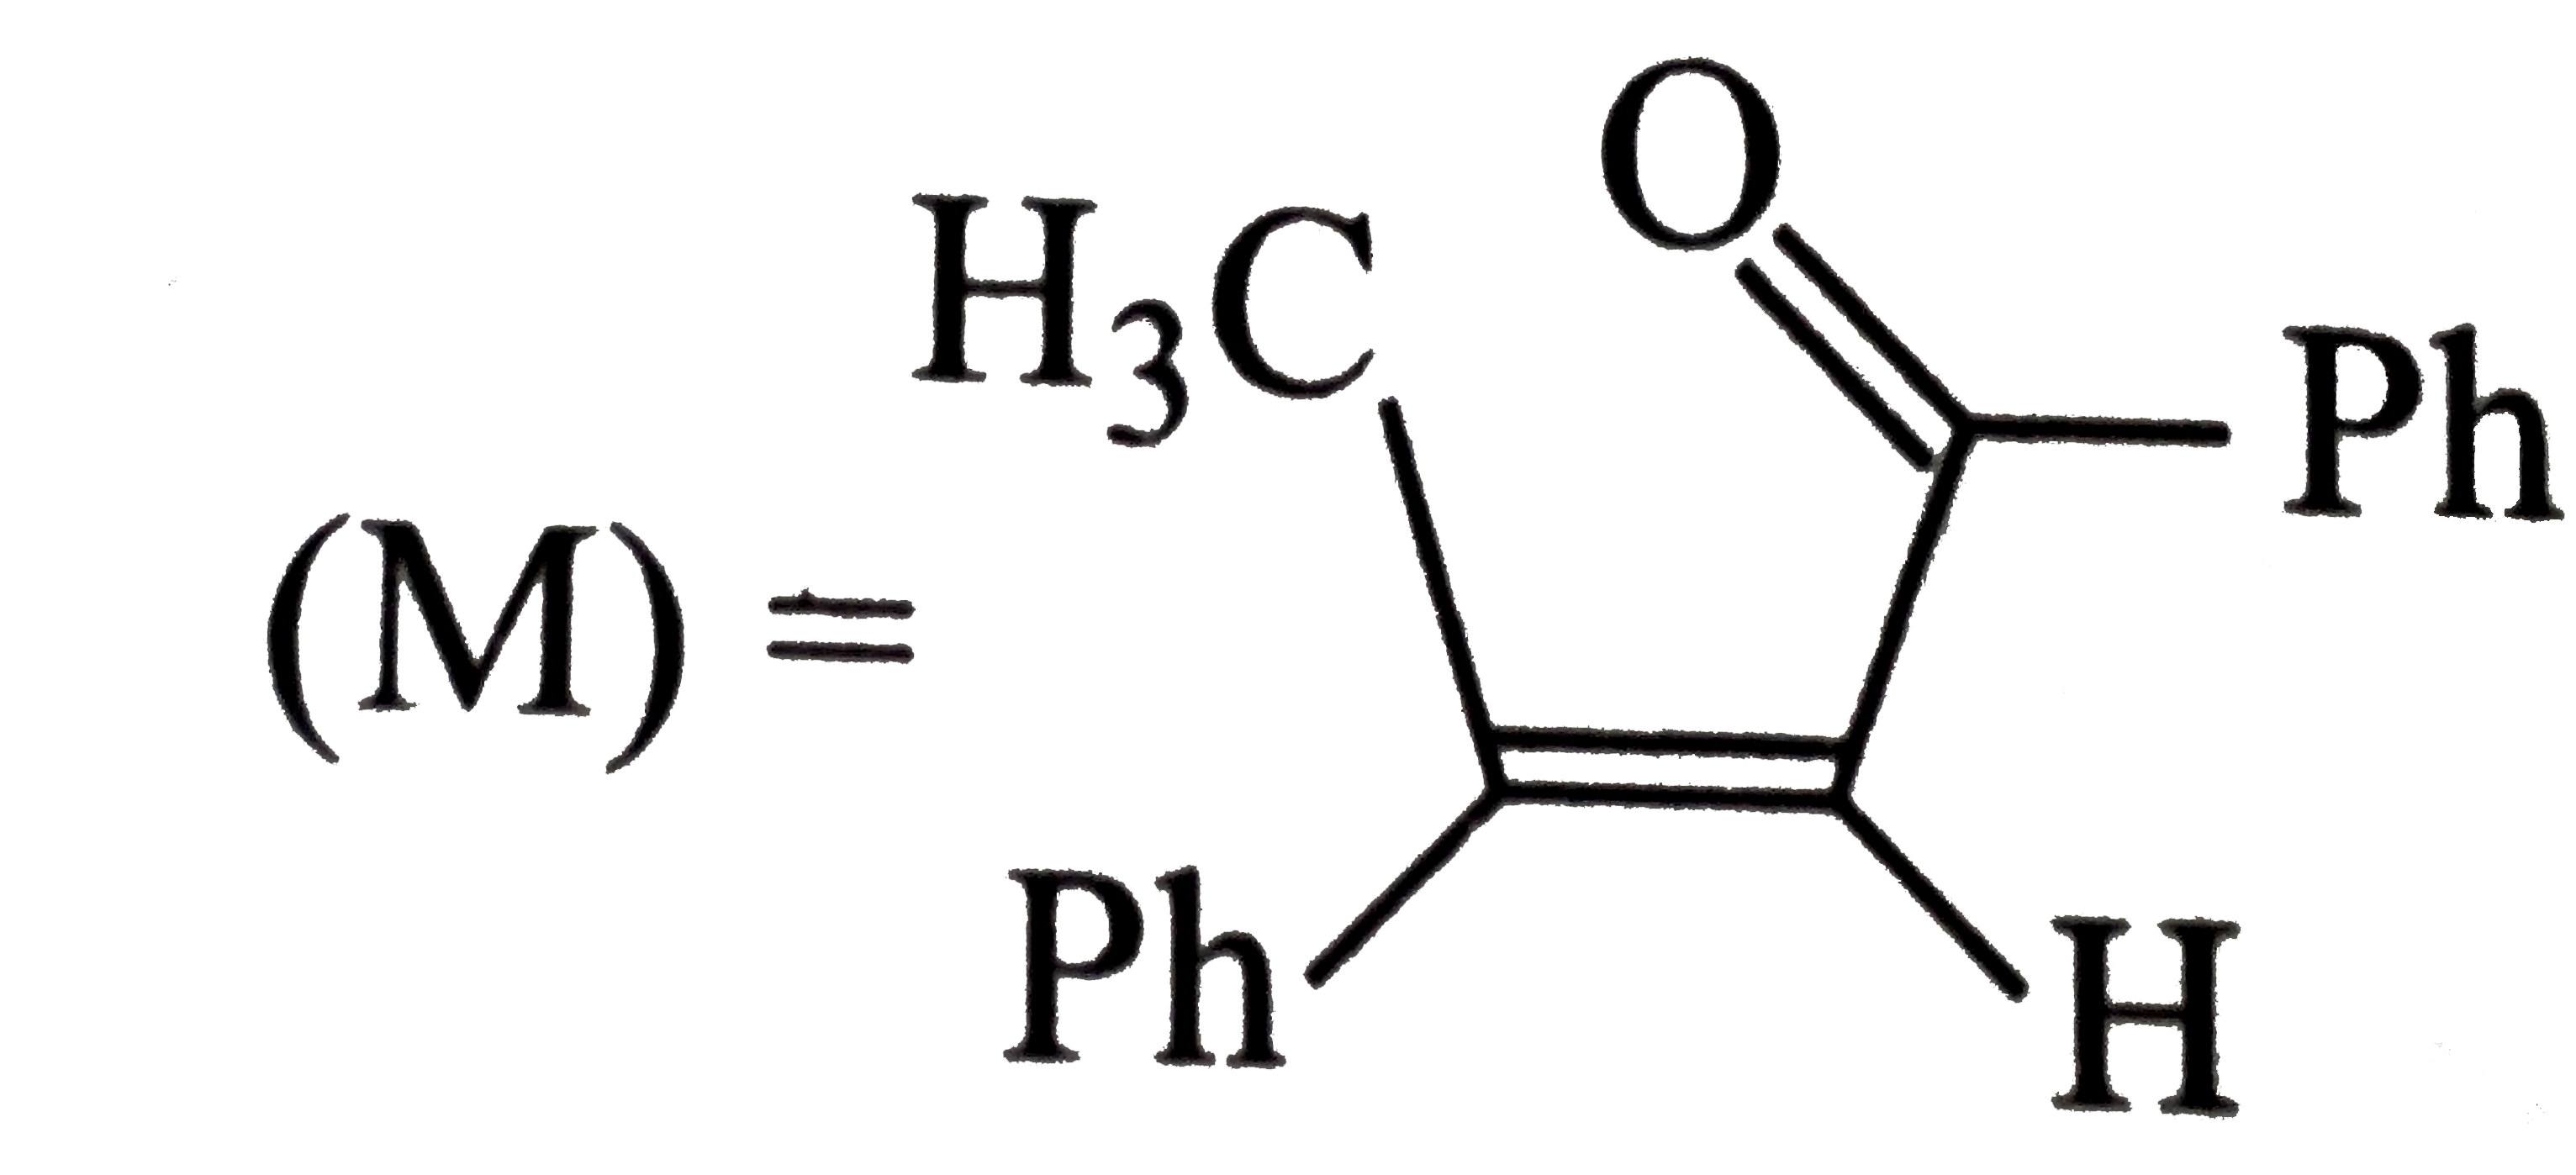 A tertiary alcohol (H) upon acid-catalysed dehydration gives a product (I). Ozonolysis of (I) leads to compounds (J) and (K). Compound (J) upon reaction with KOH gives benzyl alcohol and a compound (L), whereas (K) on reaction with KOH gives only (M).      The structures of compounds (J), (K), and (L), respectively, are: